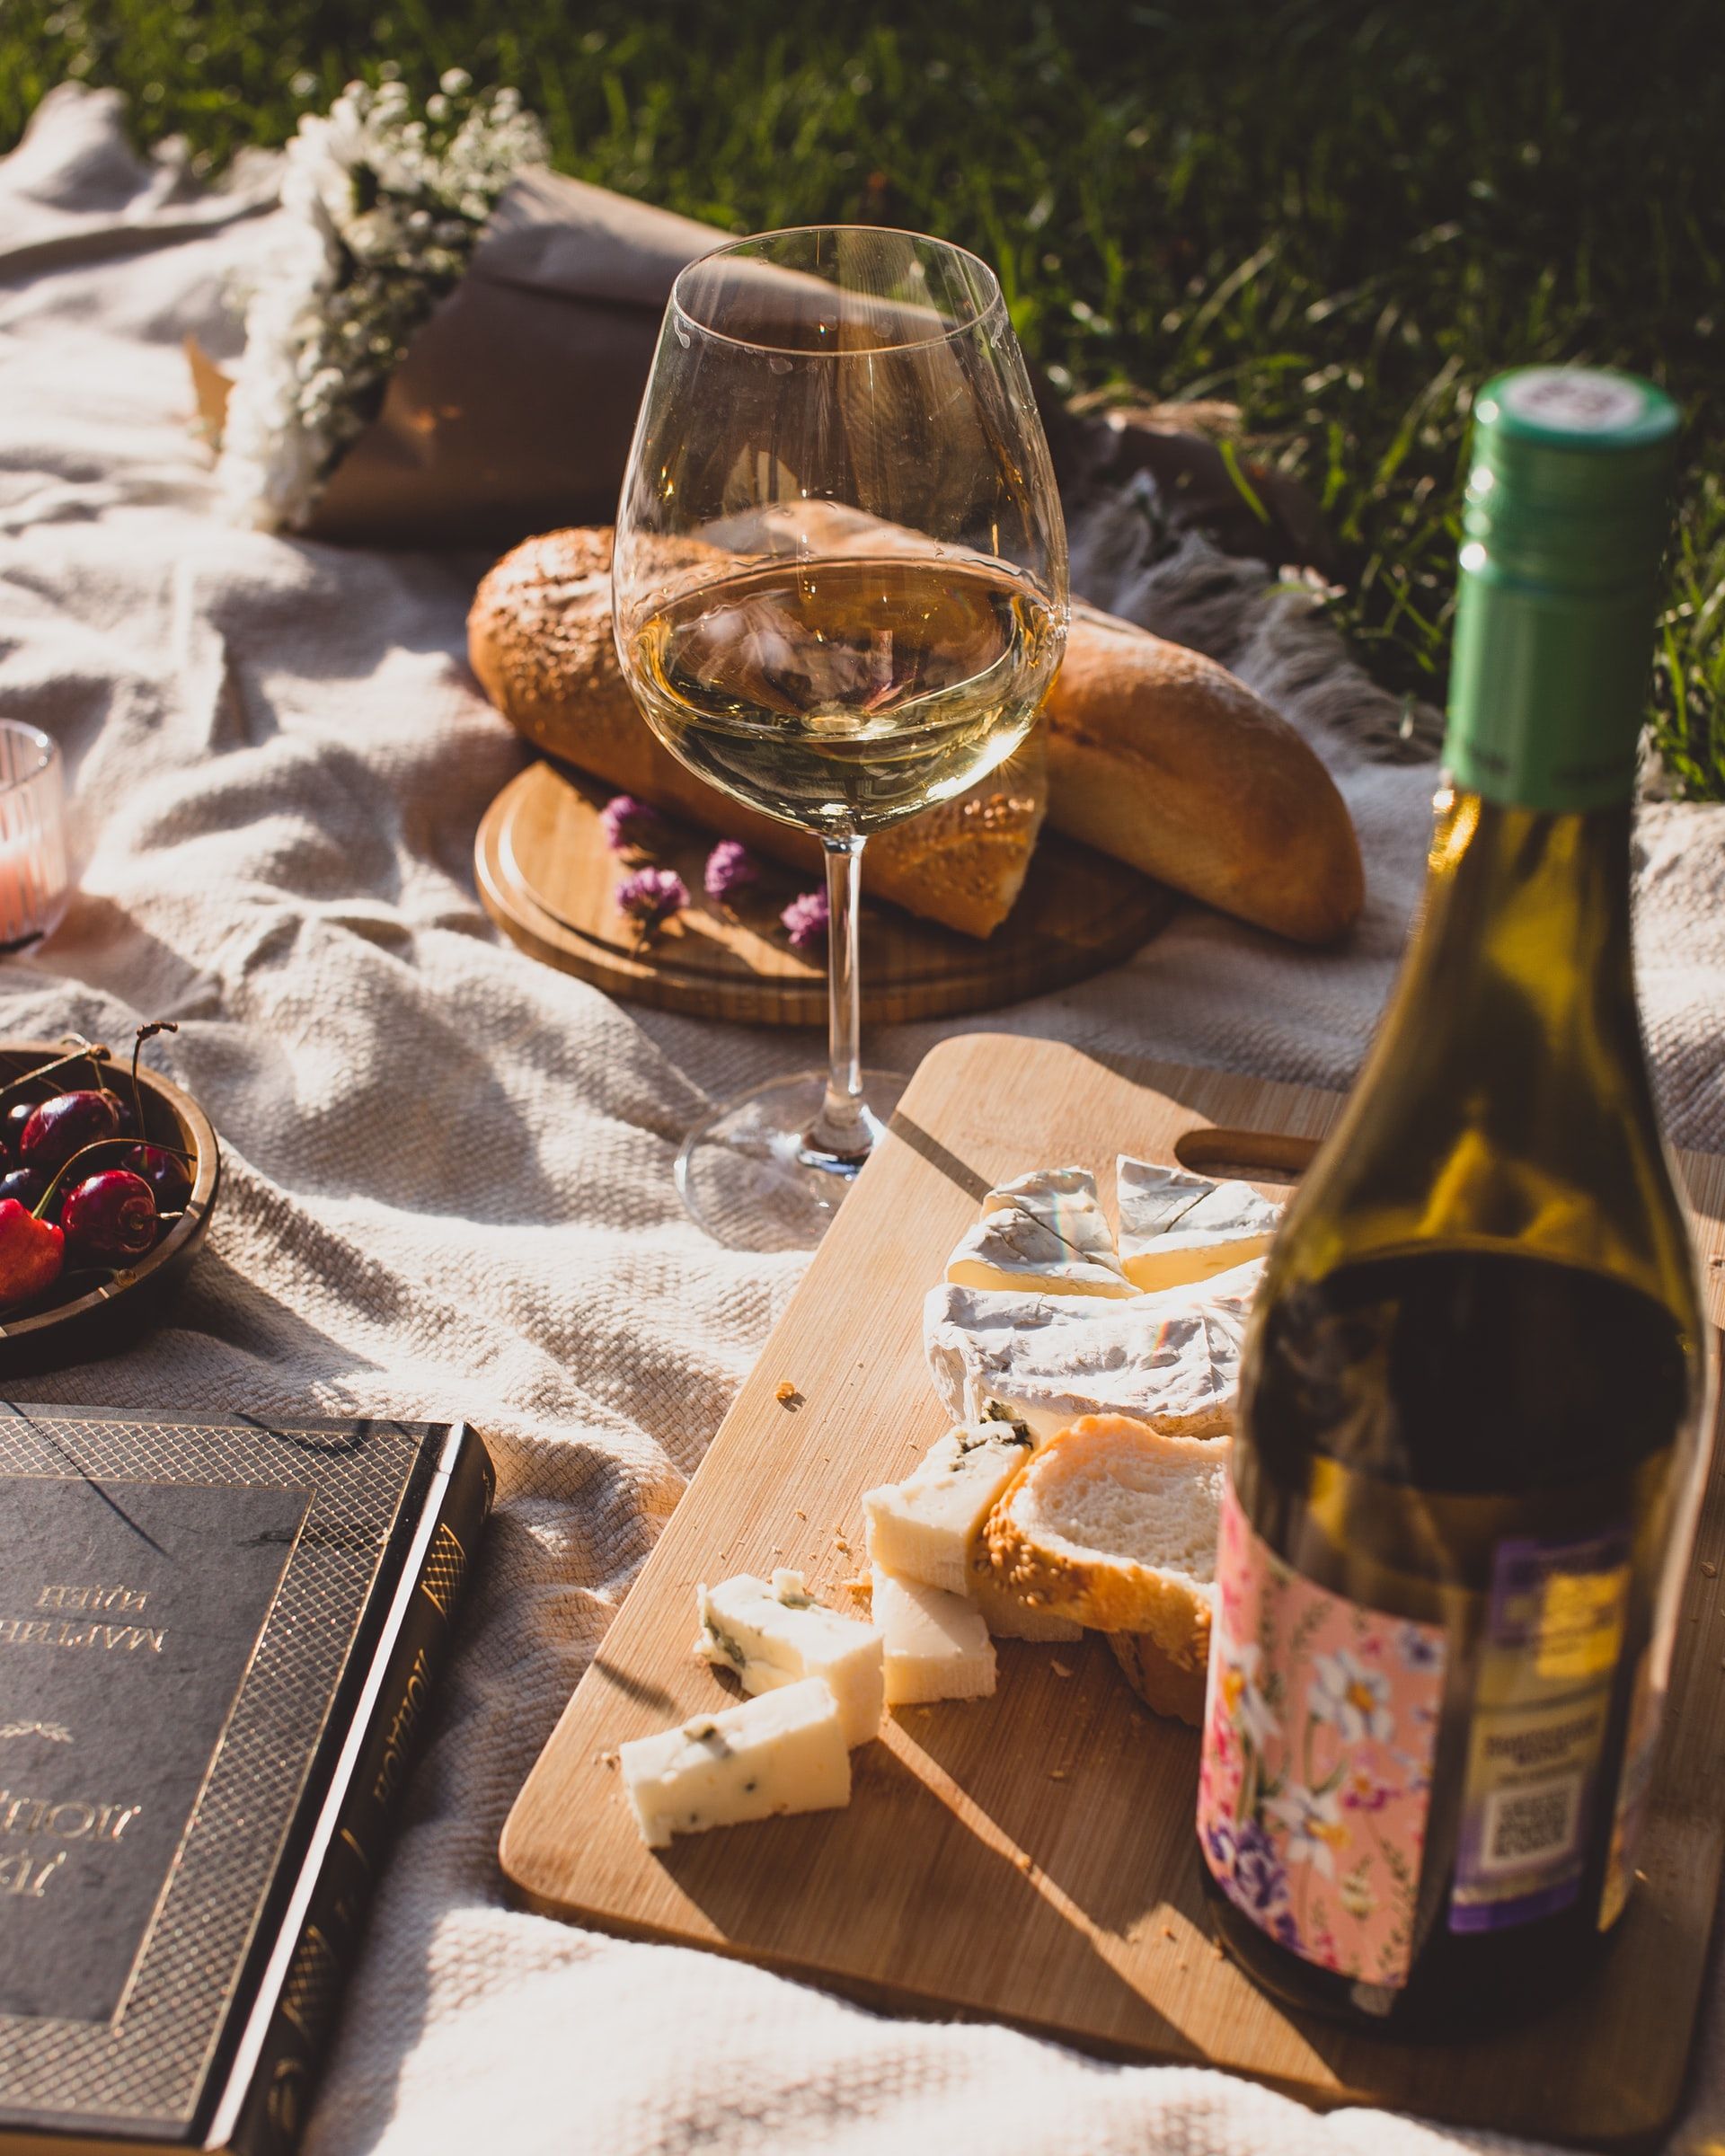 A glass of wine at a picnic